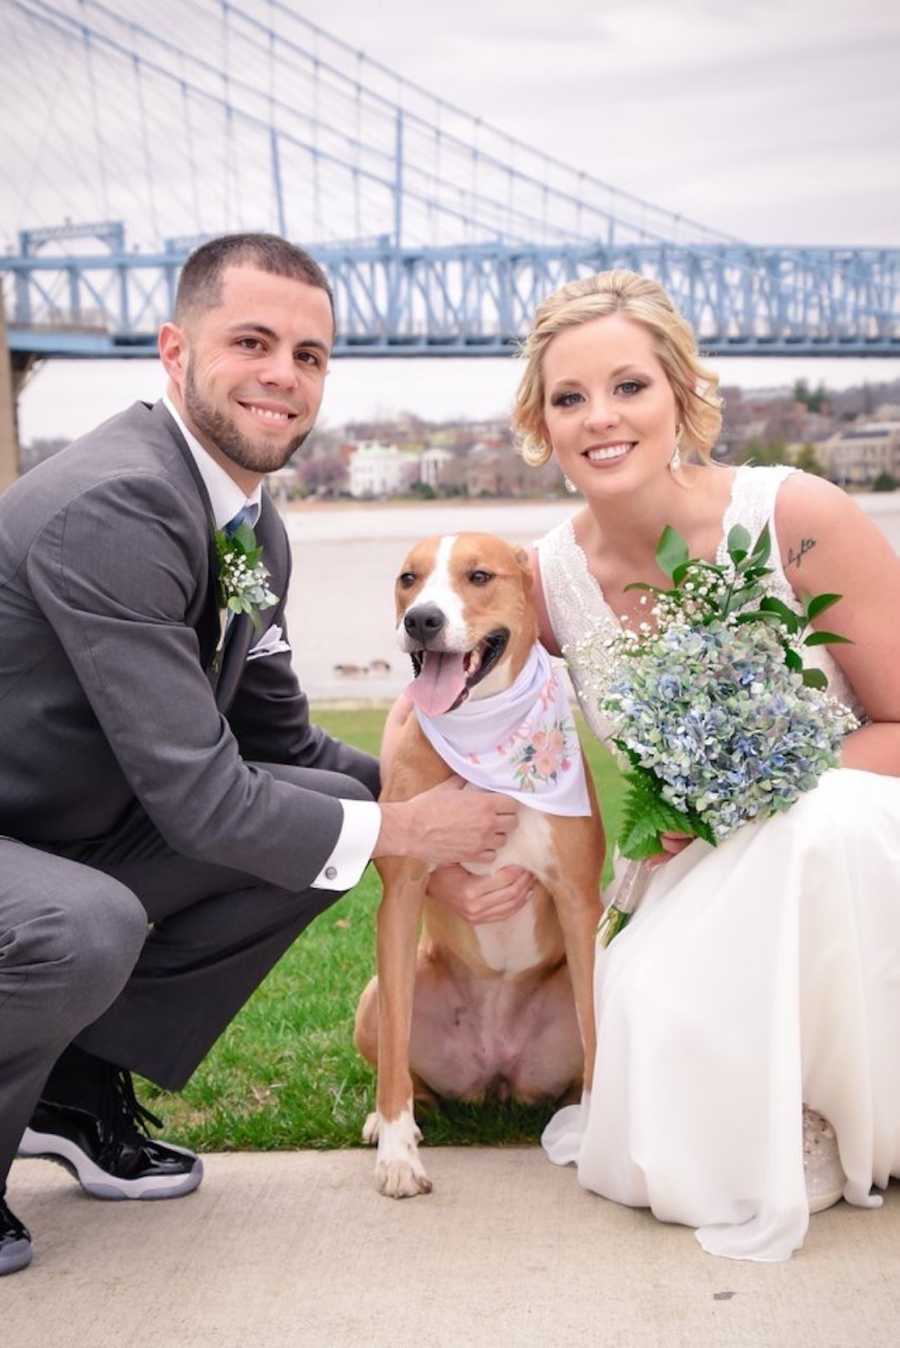 Bride and groom smile as they kneel outside beside their dog